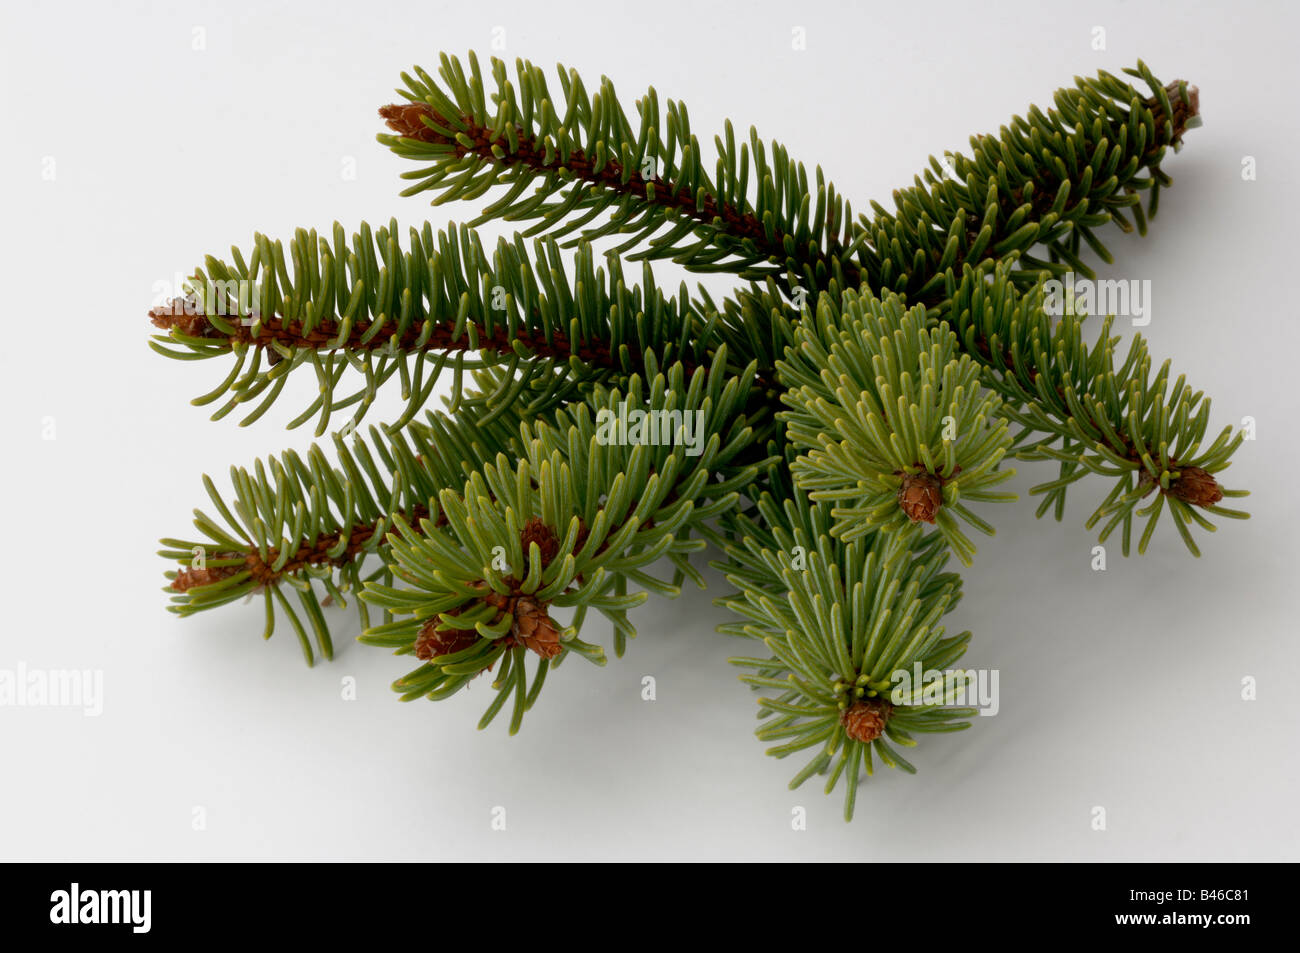 Common Spruce Norway Spruce Picea abies twig studio picture Stock Photo